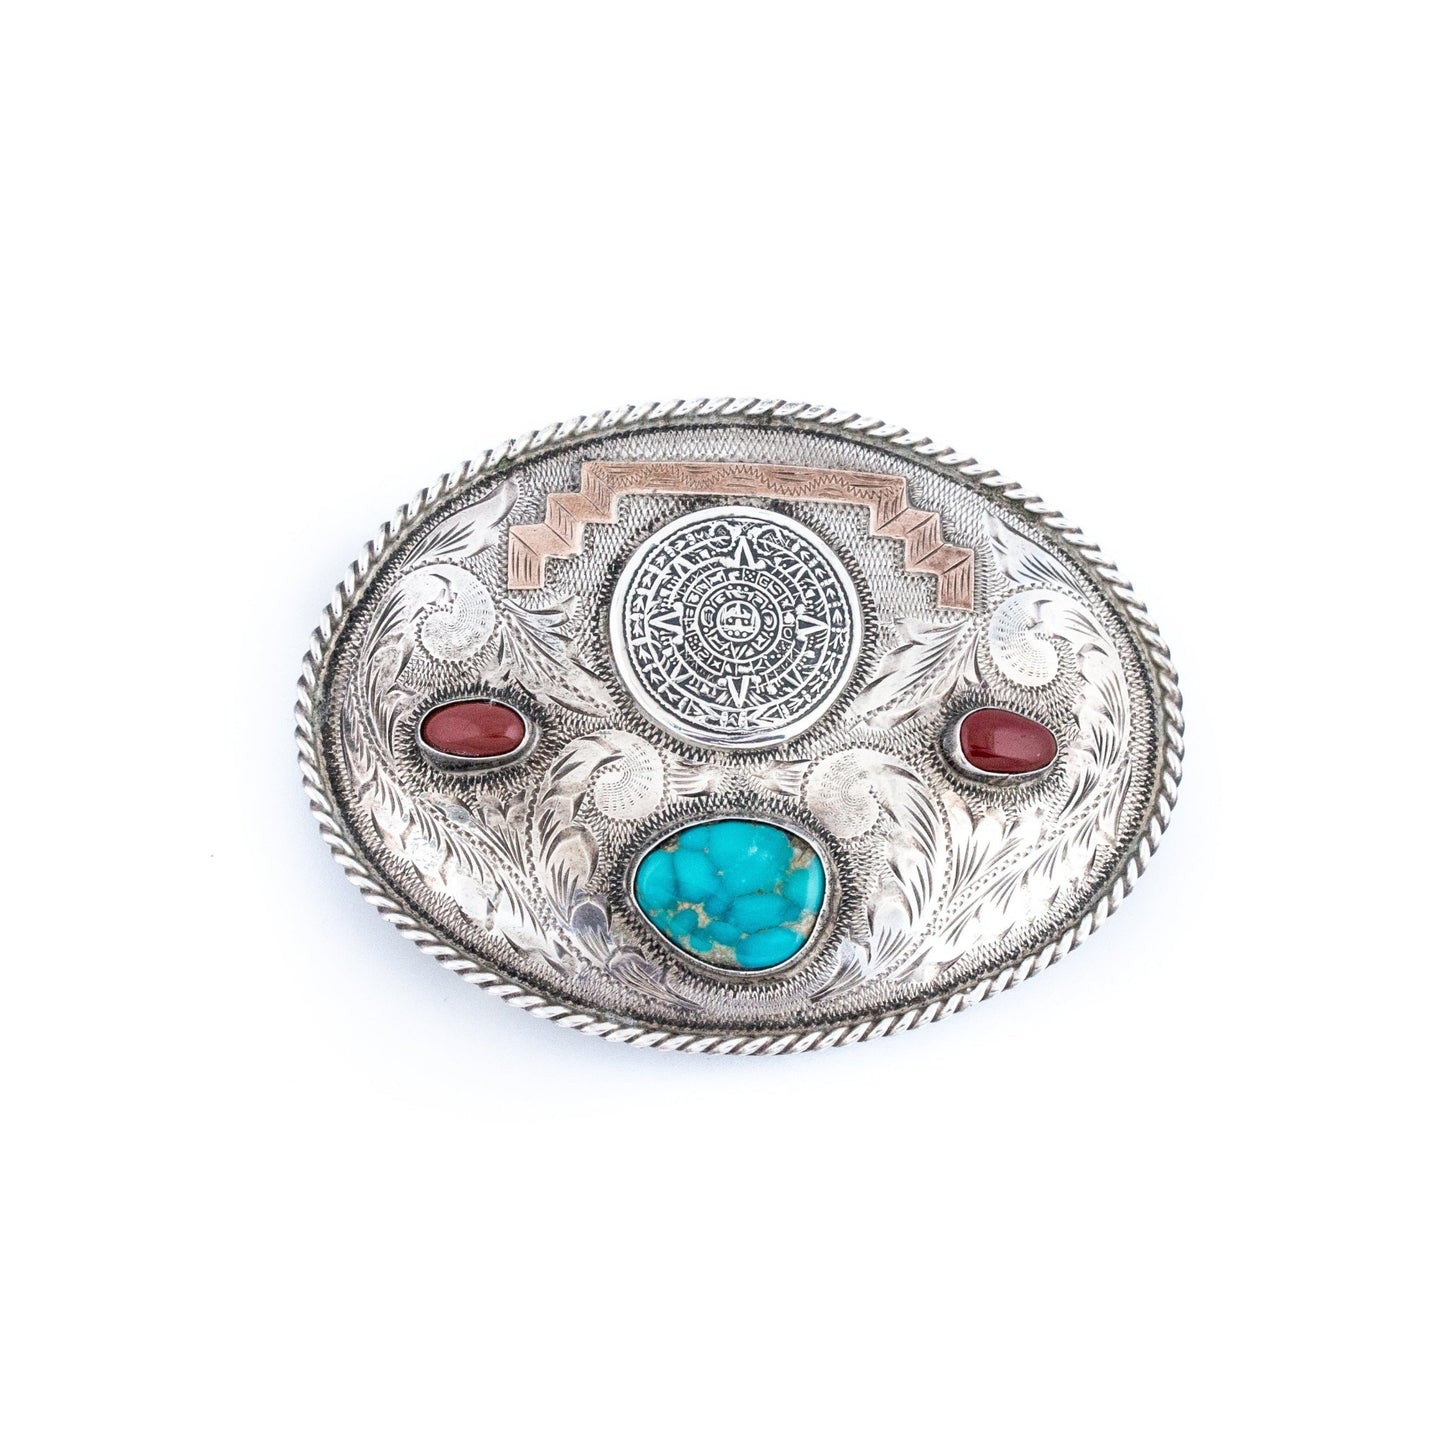 Red Coral & Turquoise Mayan Calendar Taxco Belt Buckle - Kingdom Jewelry